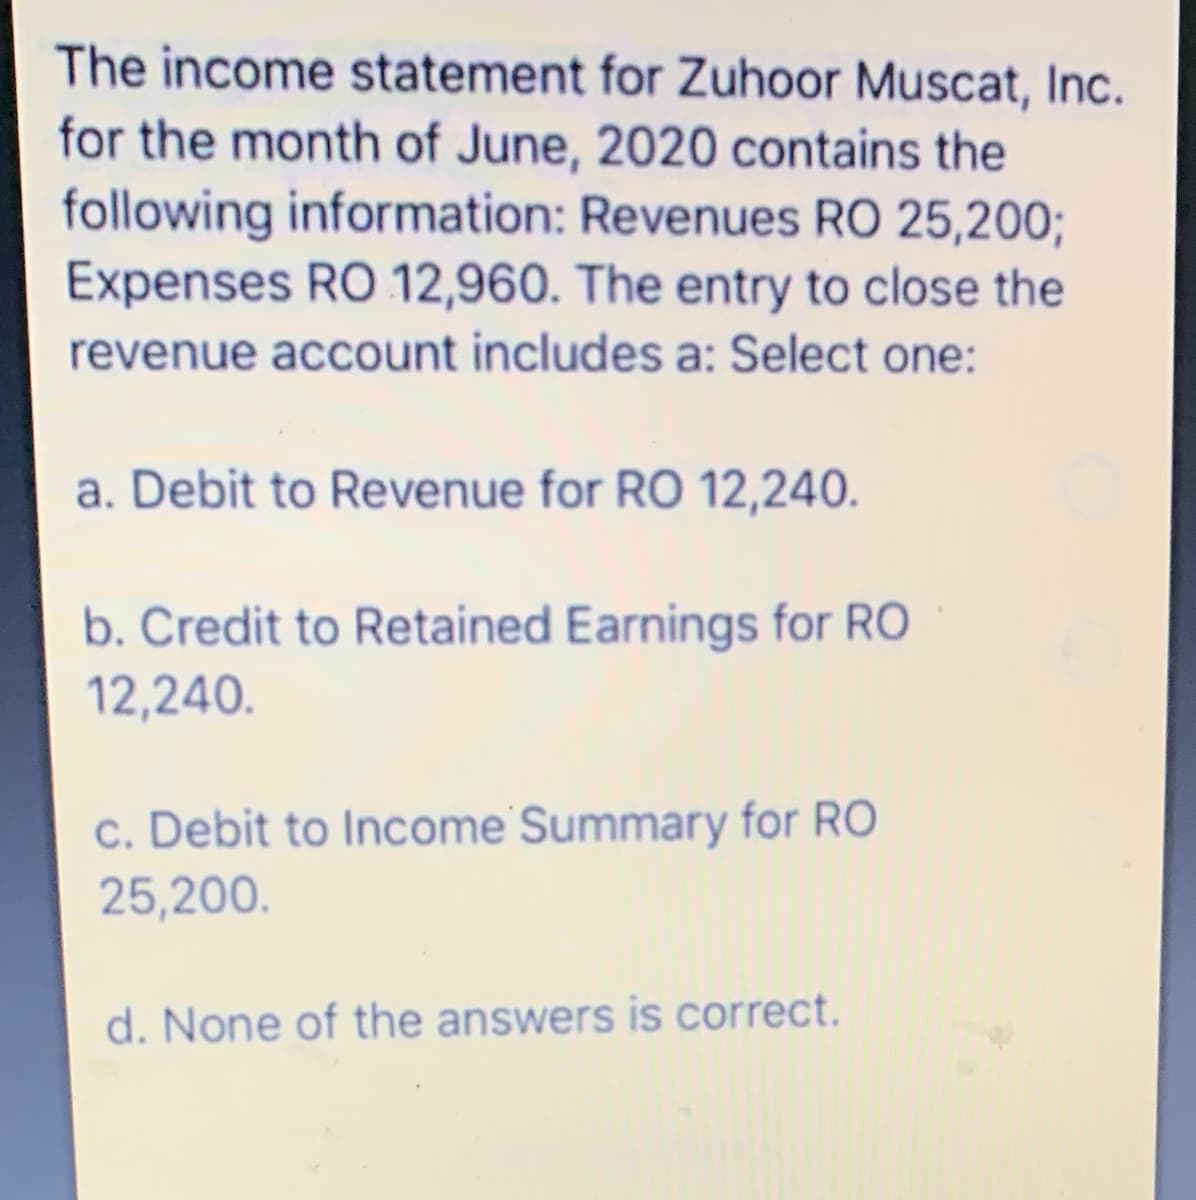 The income statement for Zuhoor Muscat, Inc.
for the month of June, 2020 contains the
following information: Revenues RO 25,200;
Expenses RO 12,960. The entry to close the
revenue account includes a: Select one:
a. Debit to Revenue for RO 12,240.
b. Credit to Retained Earnings for RO
12,240.
c. Debit to Income Summary for RO
25,200.
d. None of the answers is correct.
